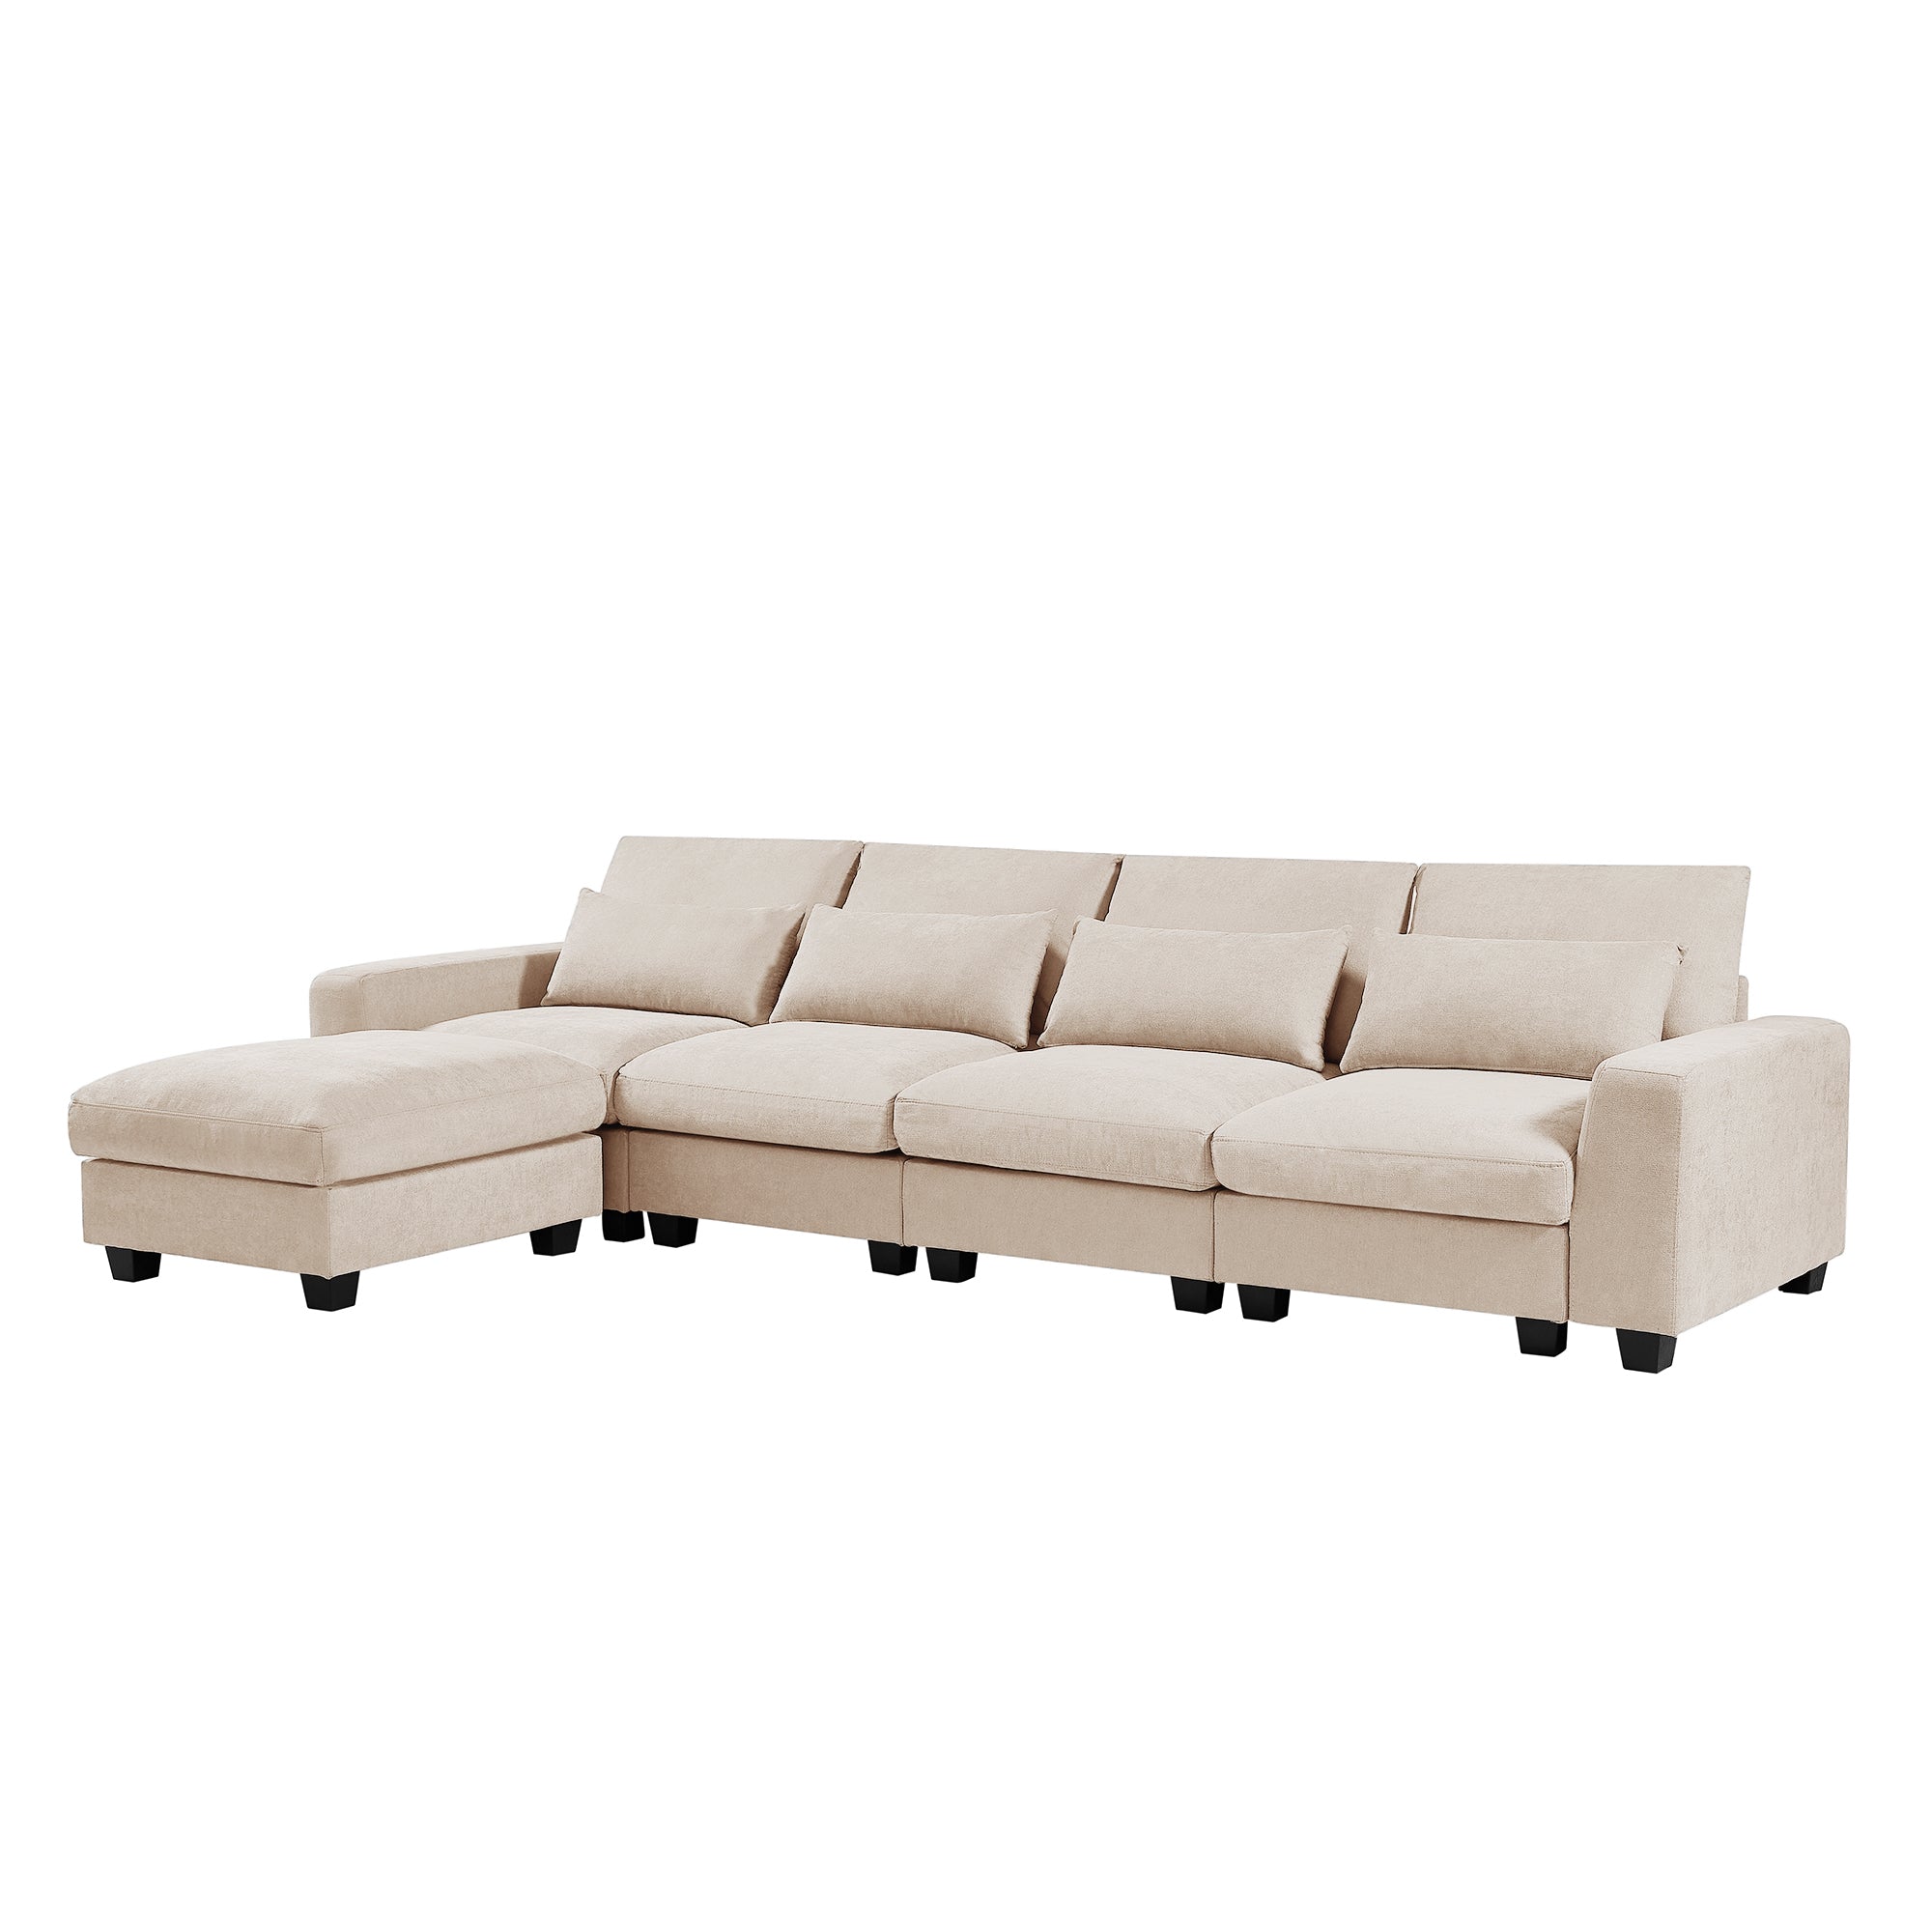 Bellemave 129.9" Modern Large L-Shape Feather Filled Sectional Sofa, Convertible Sofa Couch with Reversible Chaise